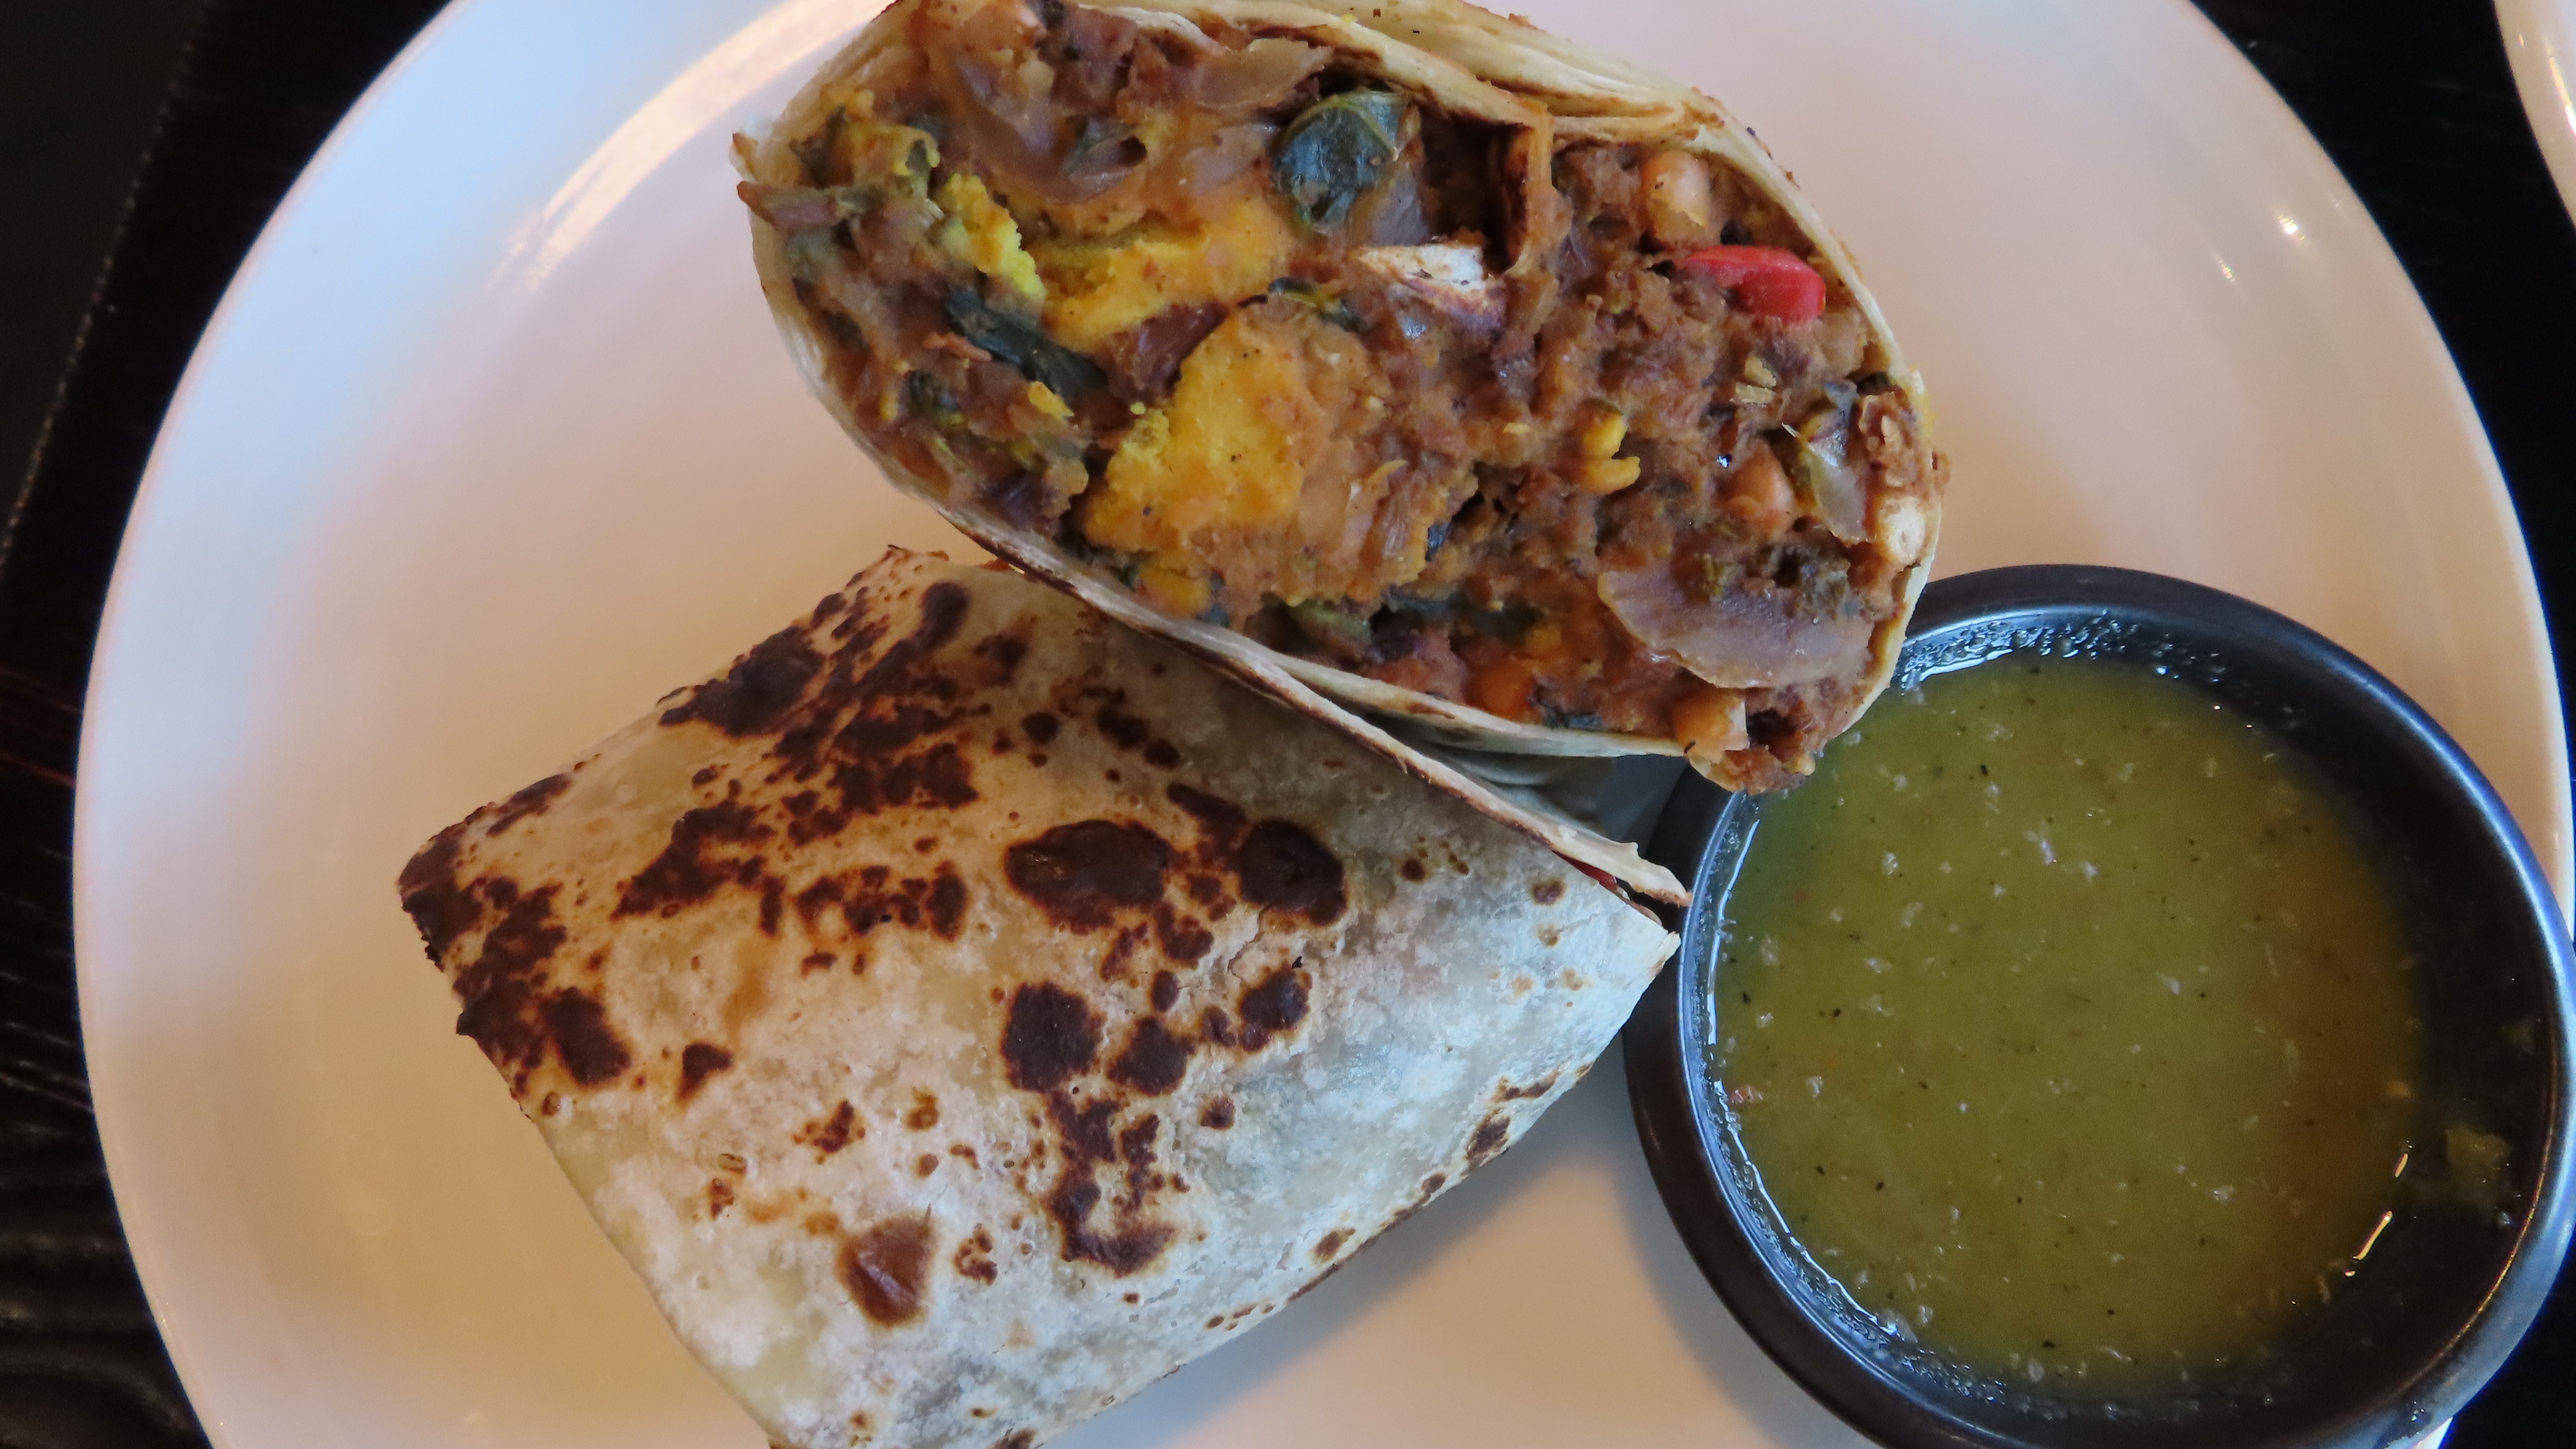 The breakfast burrito with a mild green salsa. There is a frittata made from a special flour mixture with chorizo made from wild rice and lentils and beans. The tortilla is crisped and served handsomely on a white plate.